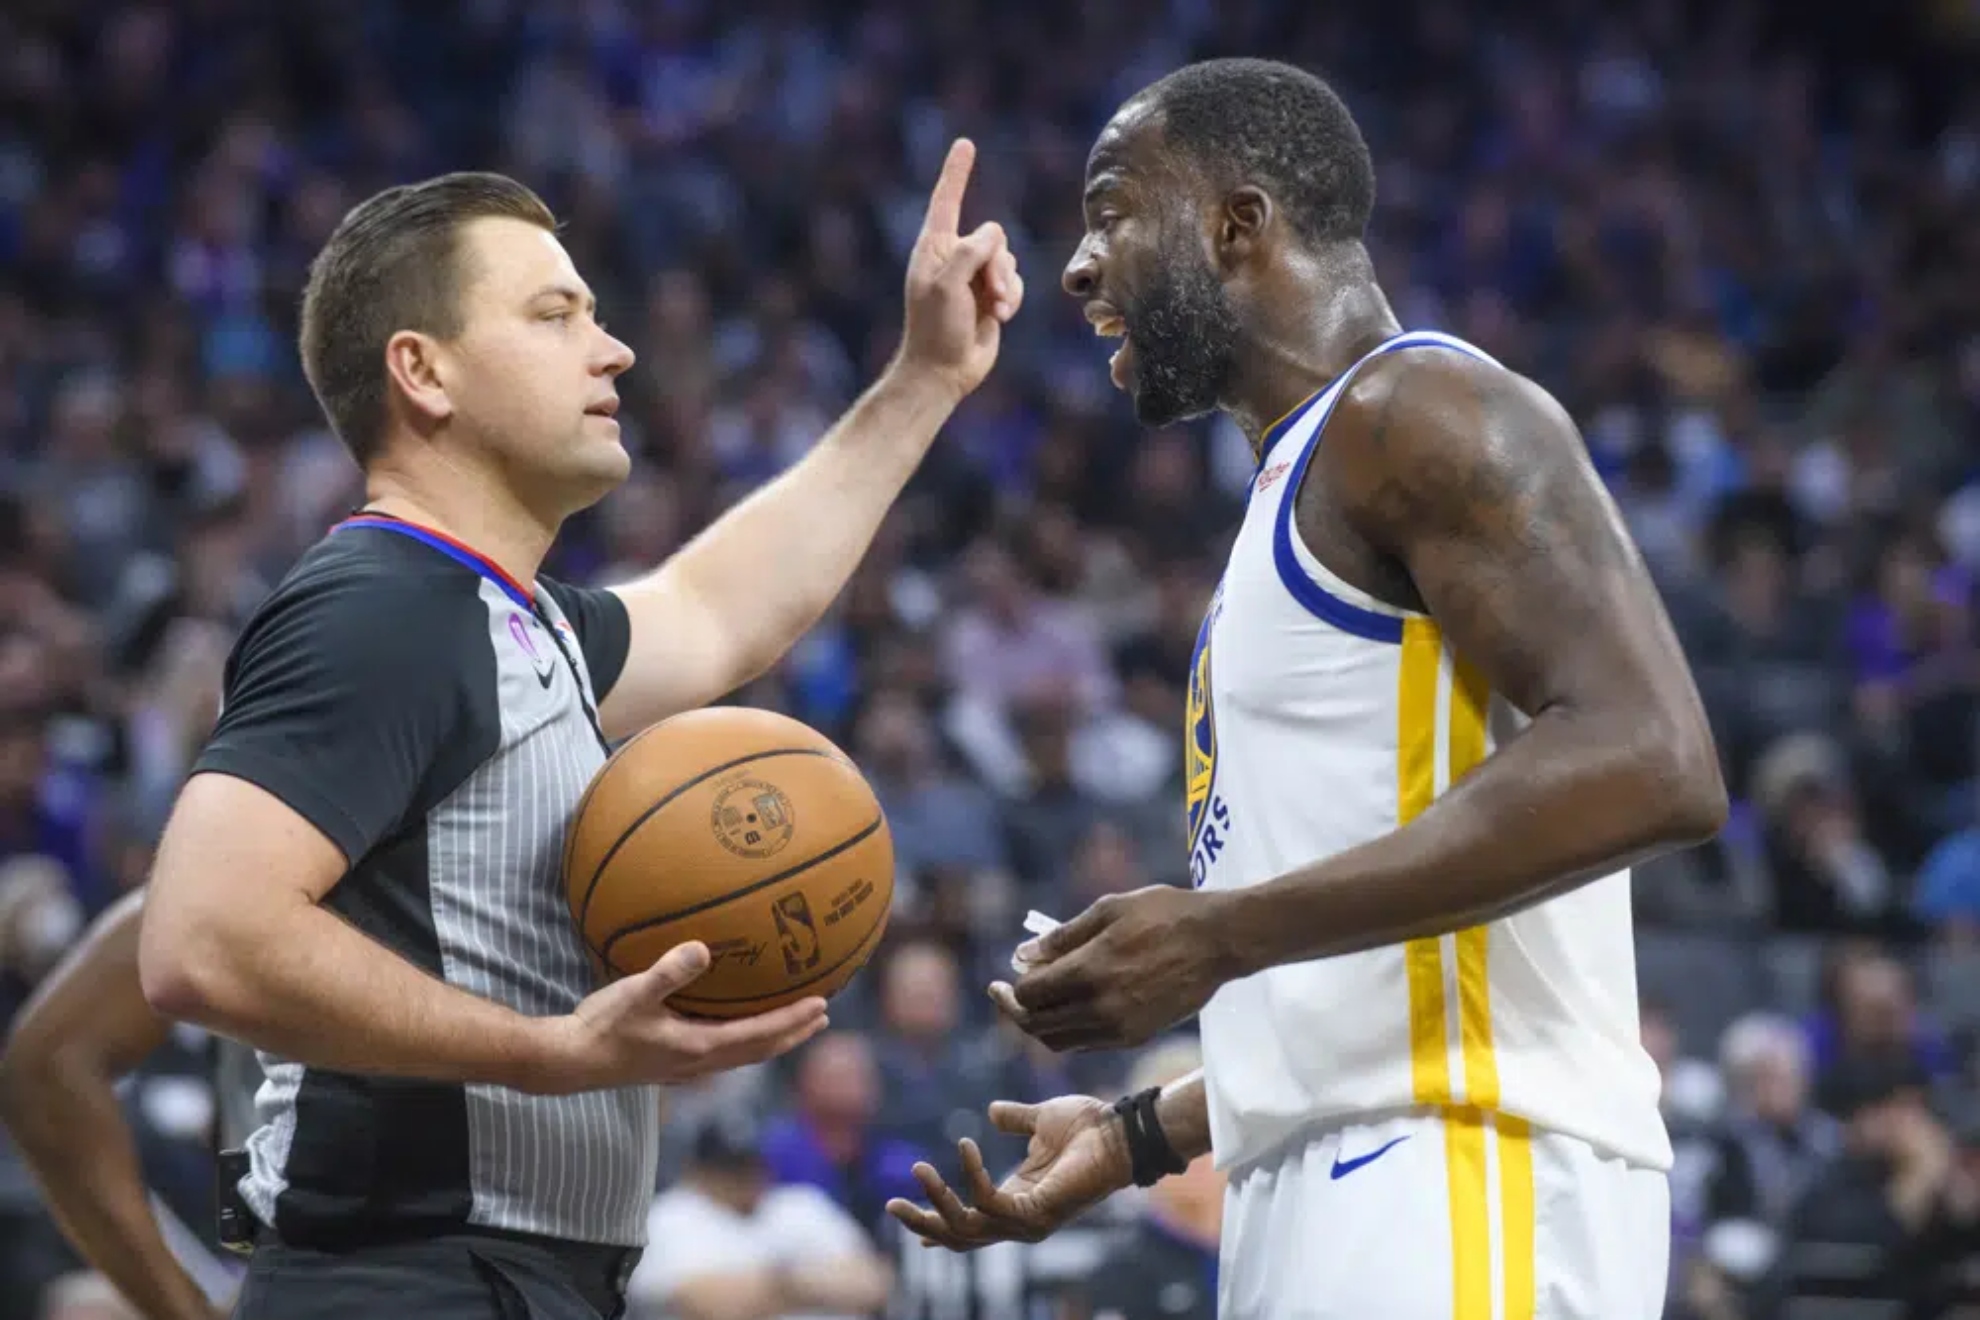 Draymond Green argues with the referee about his foul on Domantas Sabonis.